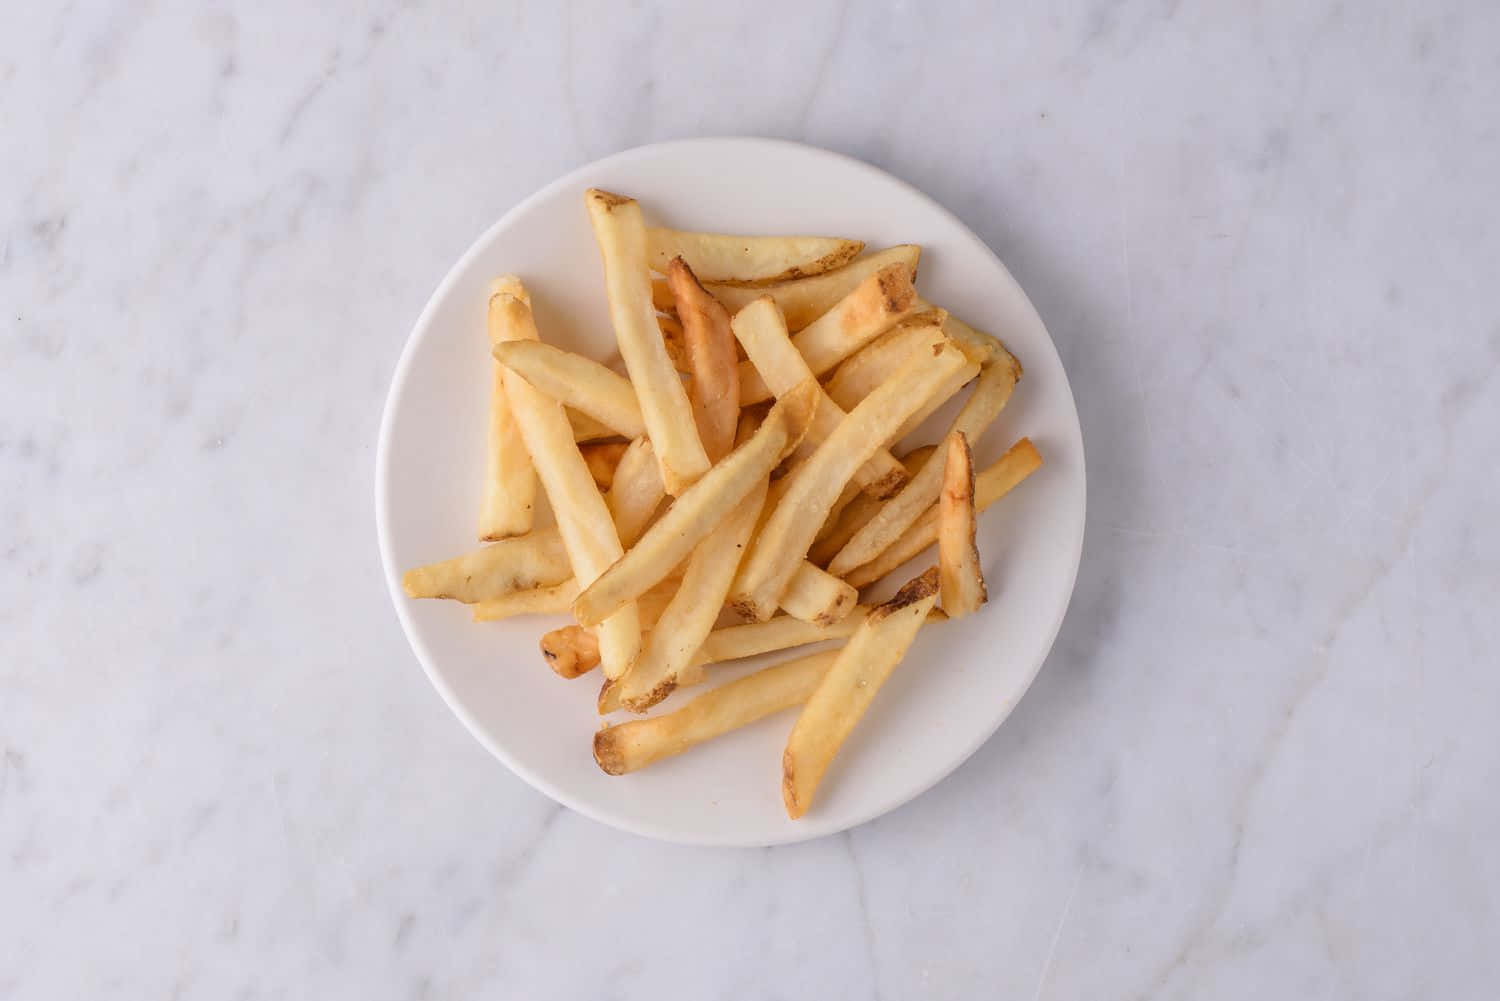 Get Your Hands on this Delicious Basket of French Fries!